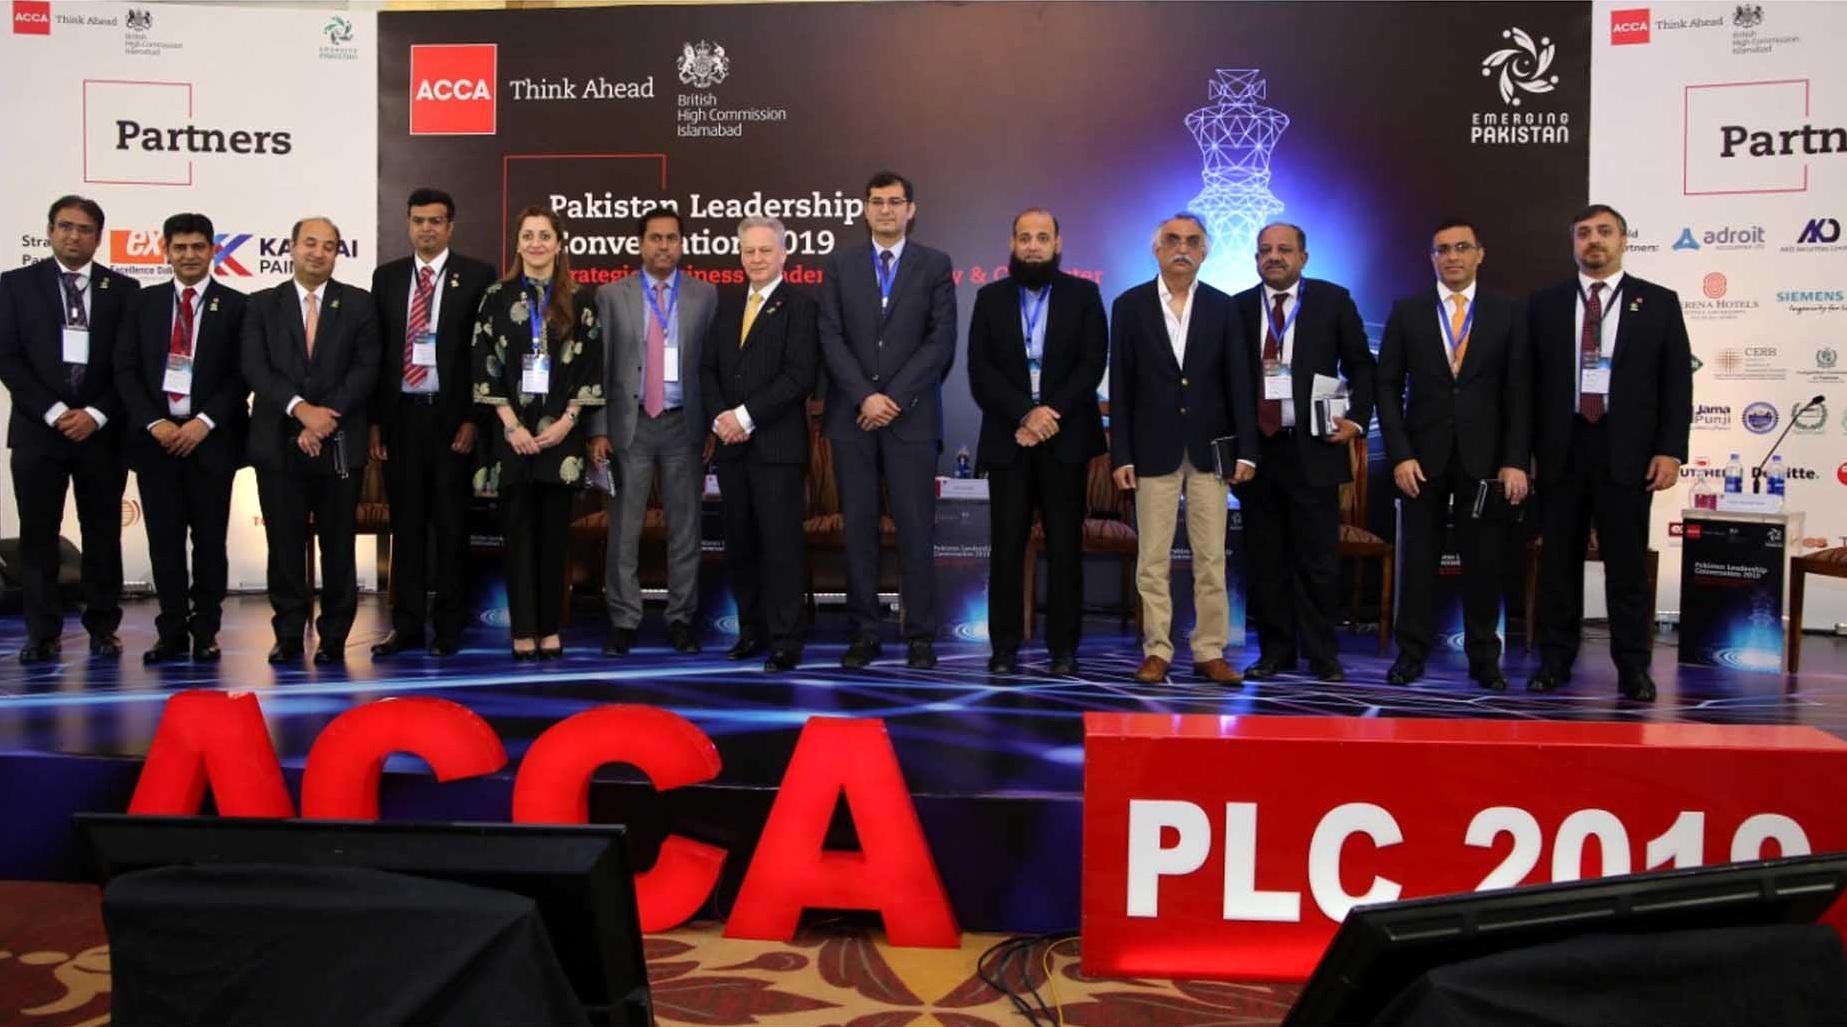 Thought-provoking and future-focused: Pakistan Leadership Conversation 2019 kick starts with a successful event in Karachi